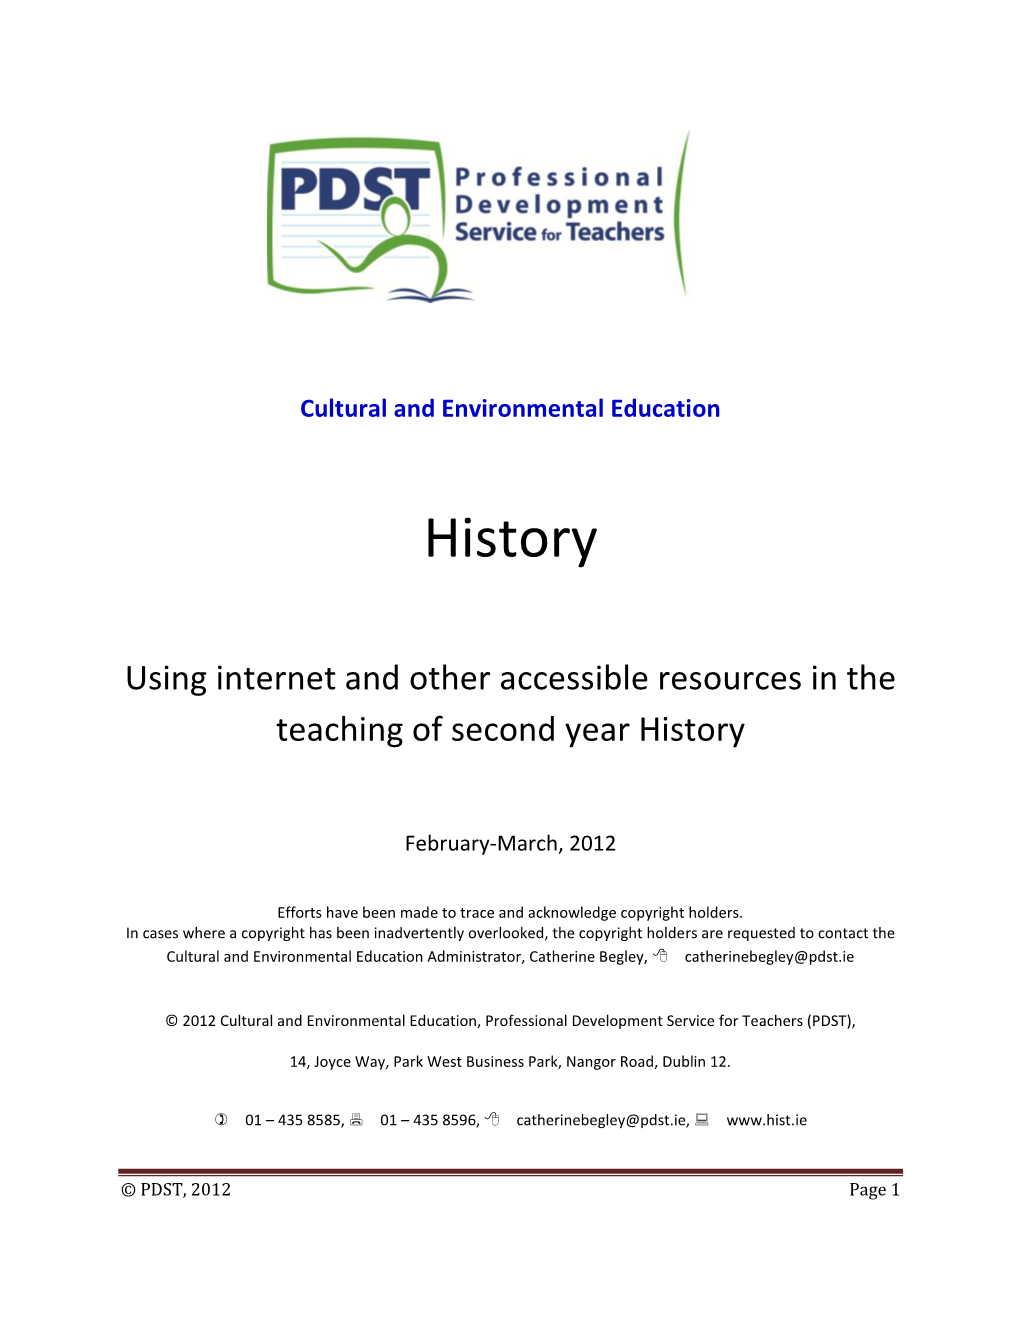 Using the Internet for Teaching Second Year History